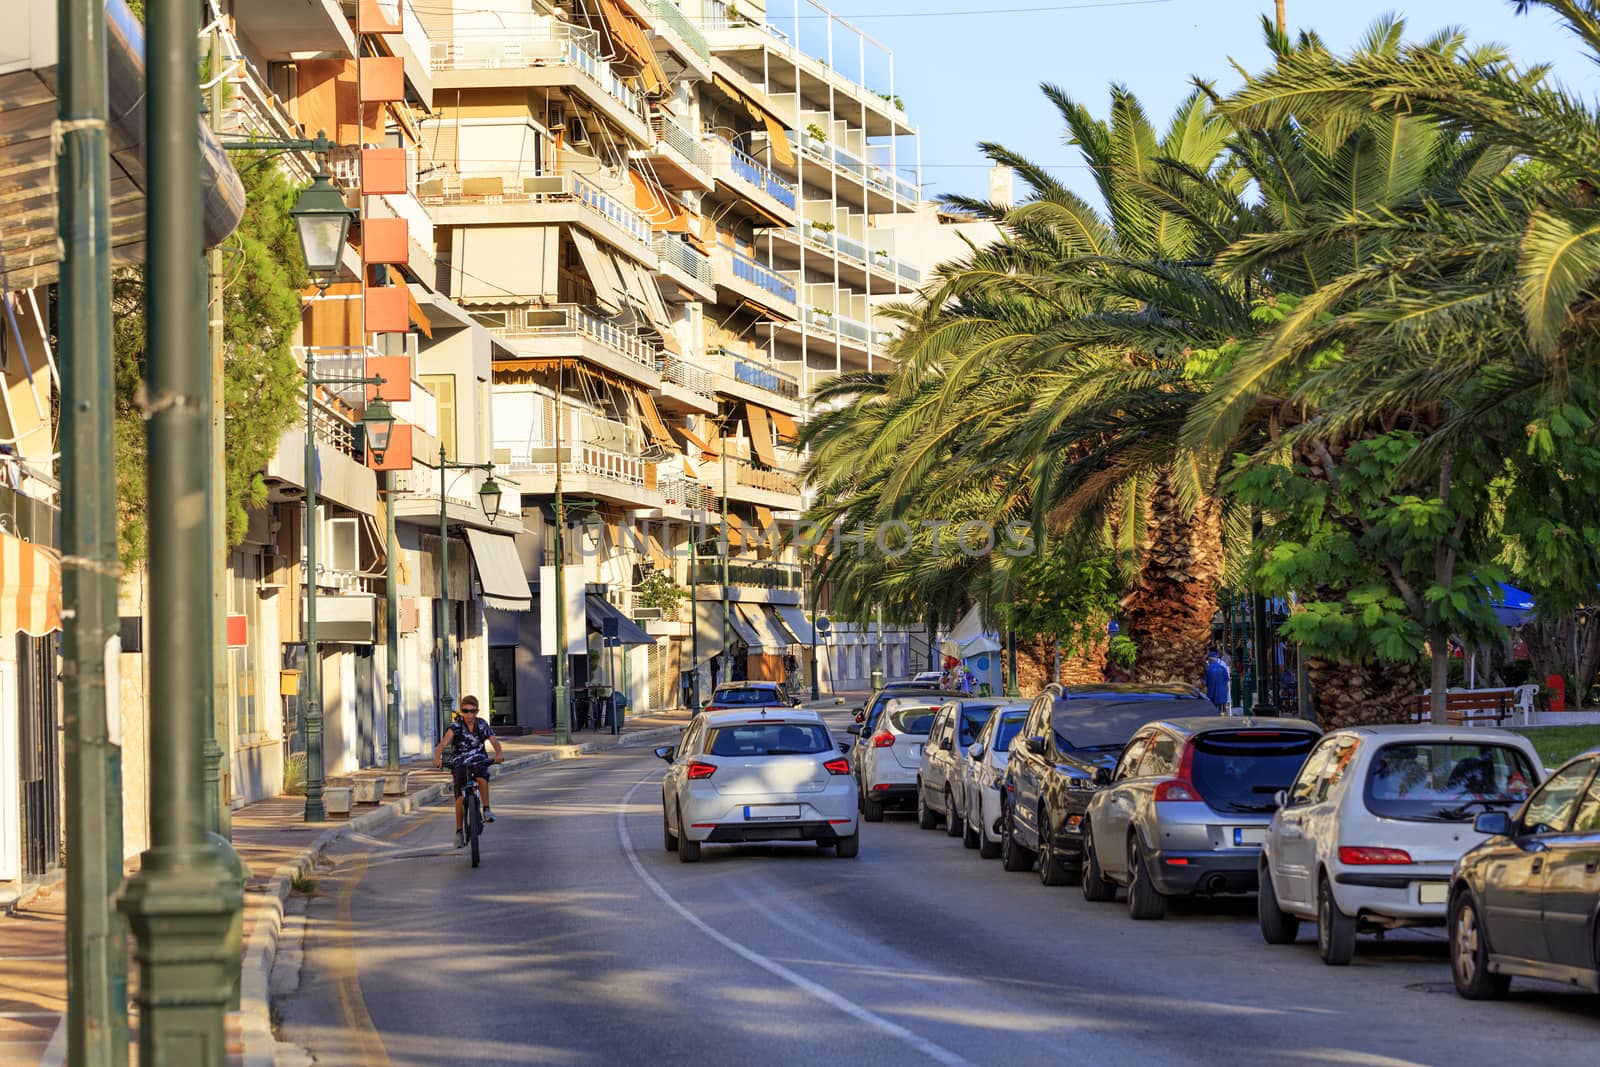 Street landscape of the summer city of Loutraki, Greece, with passing cars and a teenager on a bicycle. by Sergii